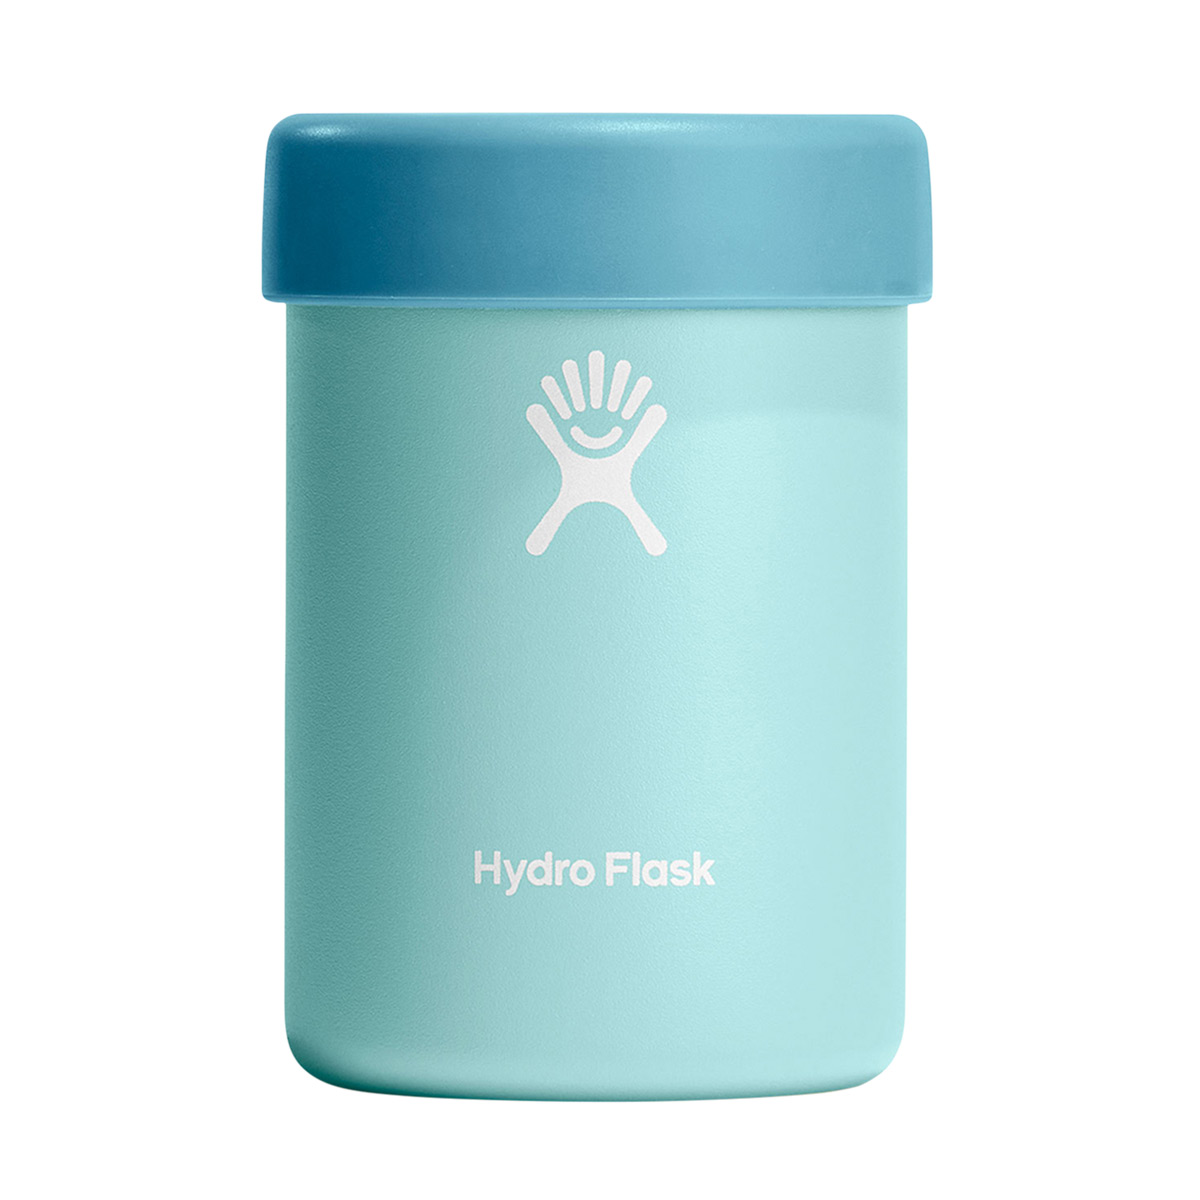 New Hydro Flask Cooler Cups & New Colors for Spring! - Thrifty NW Mom